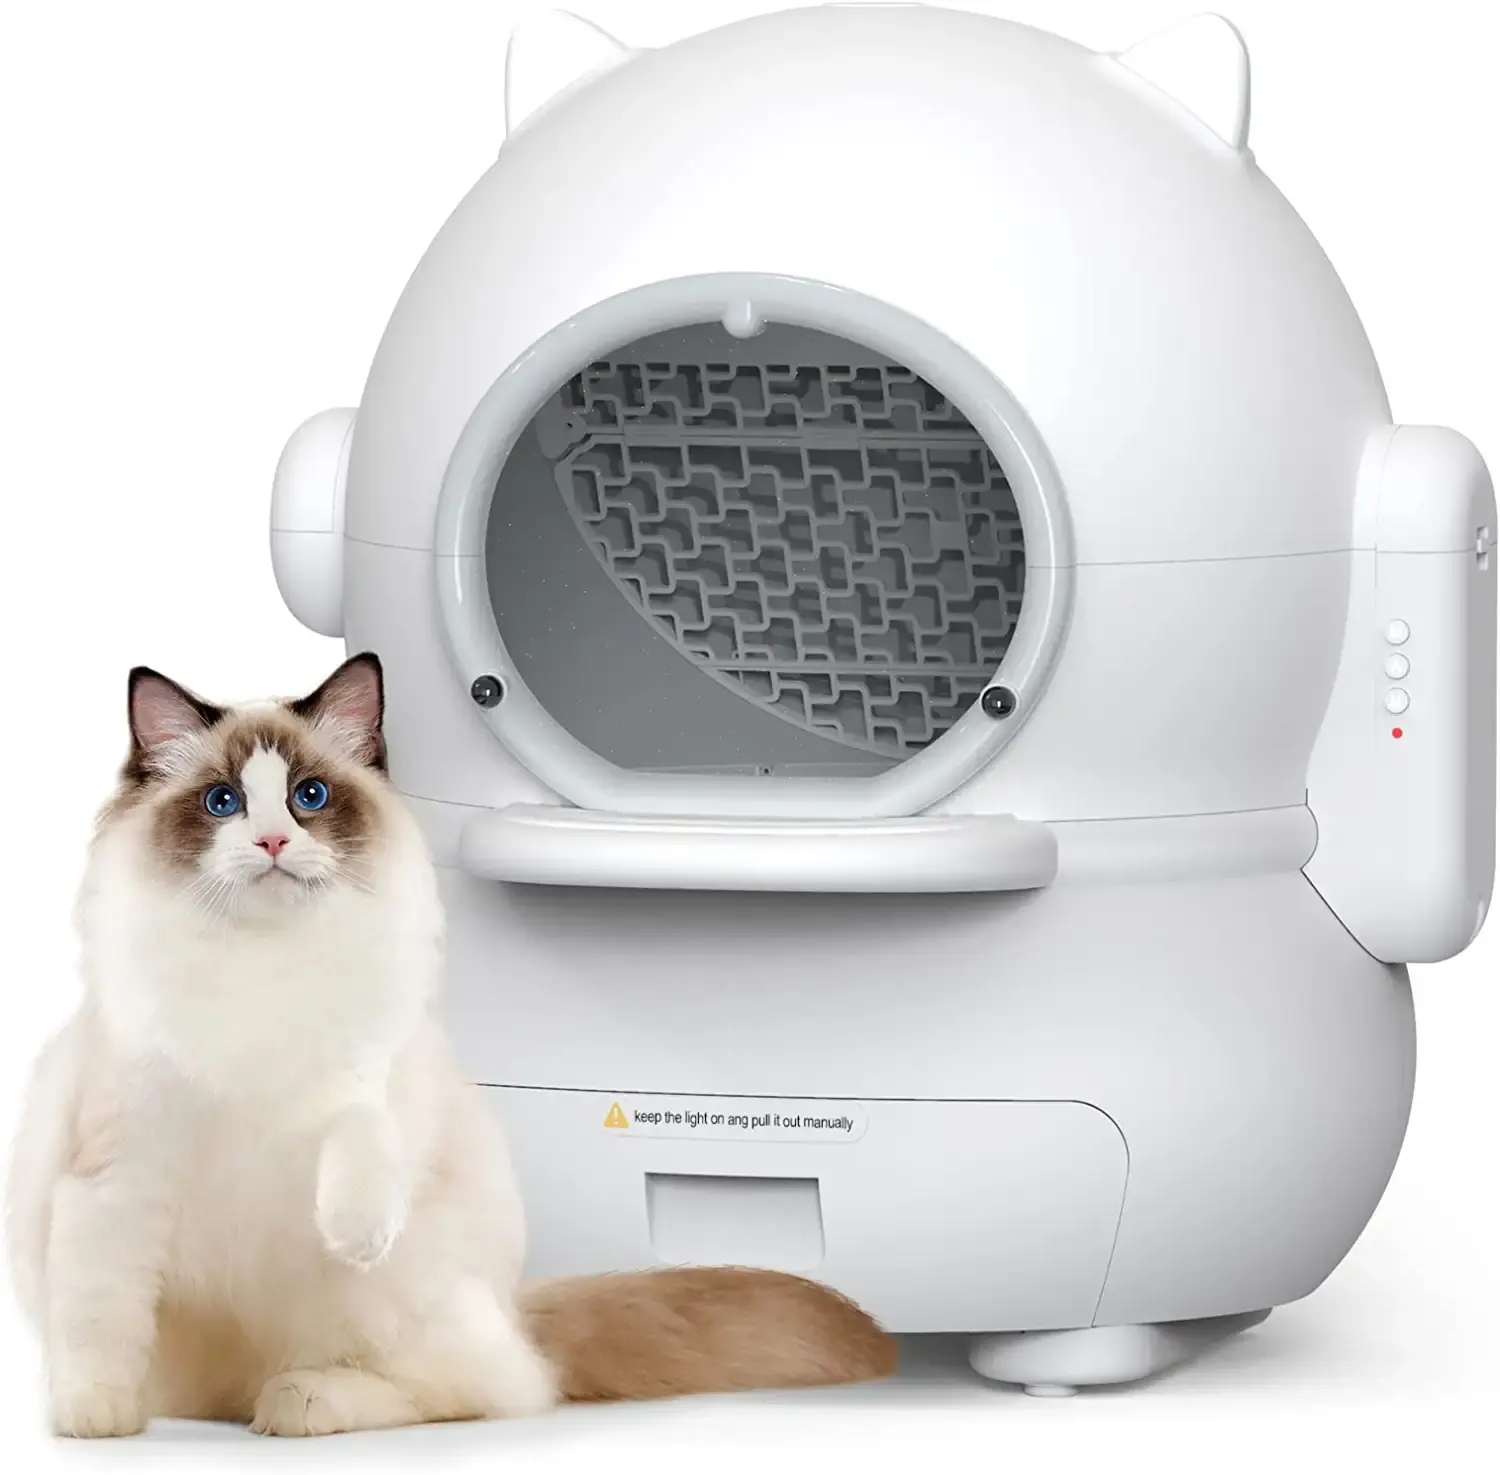 Self-Cleaning Cat Litter Box,Automatic Litter Box for Multiple of Cats with Intelligent system